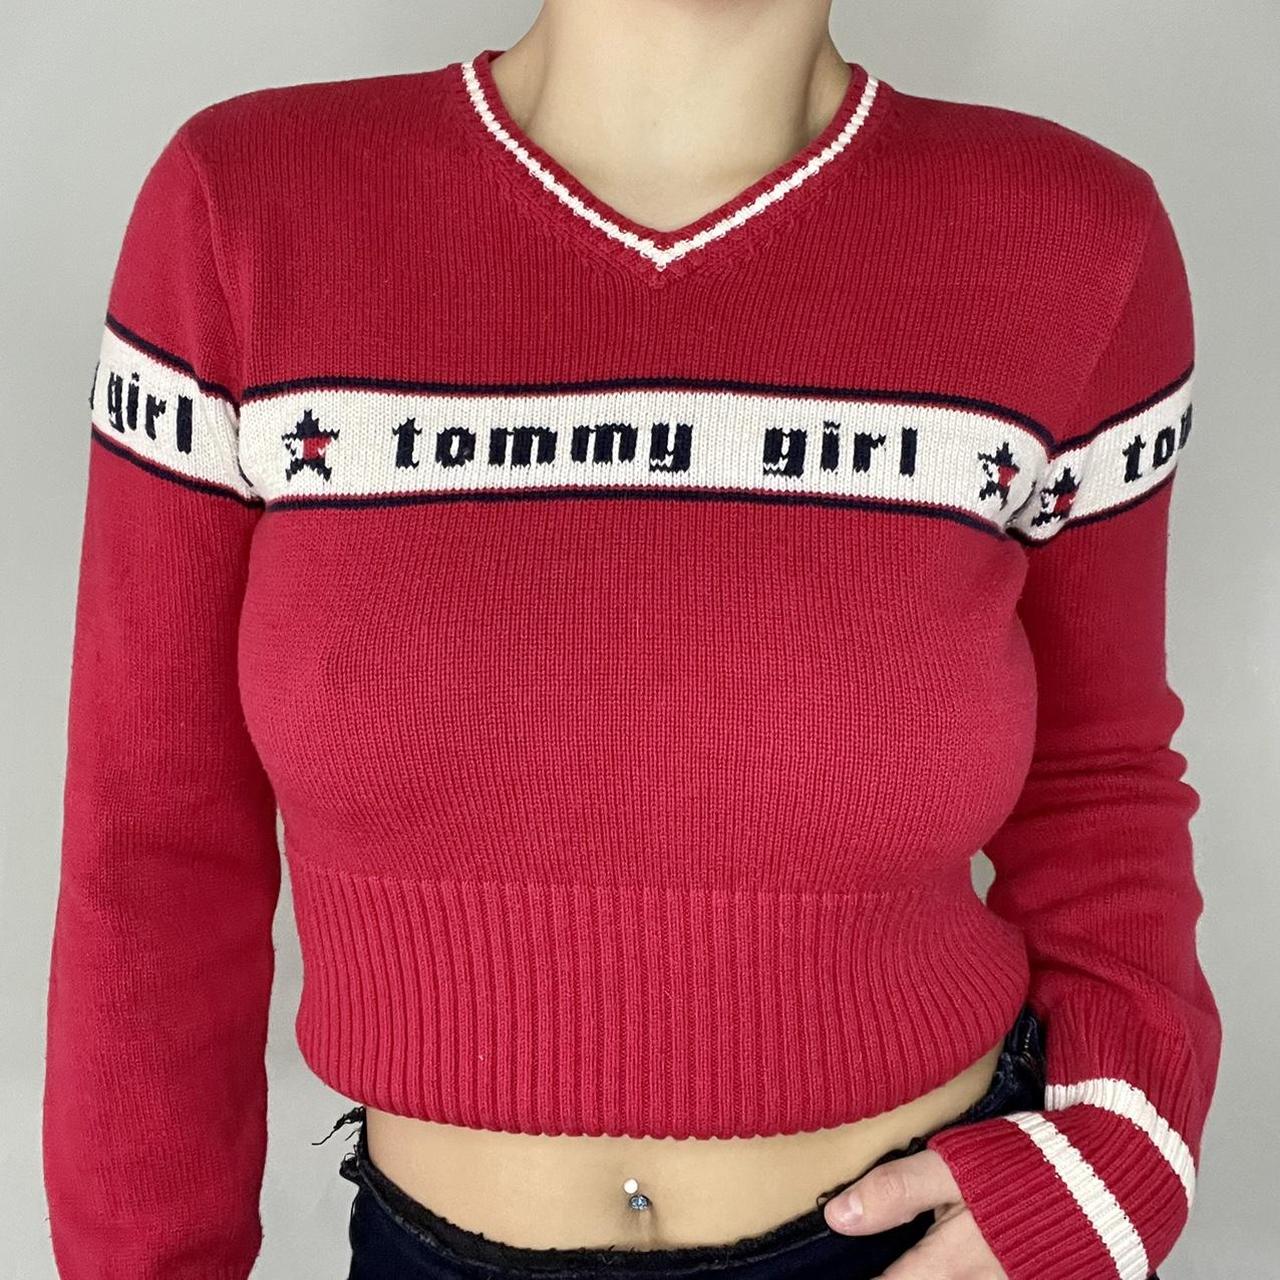 Product Image 1 - Tommy girl sweater, vintage 90s,